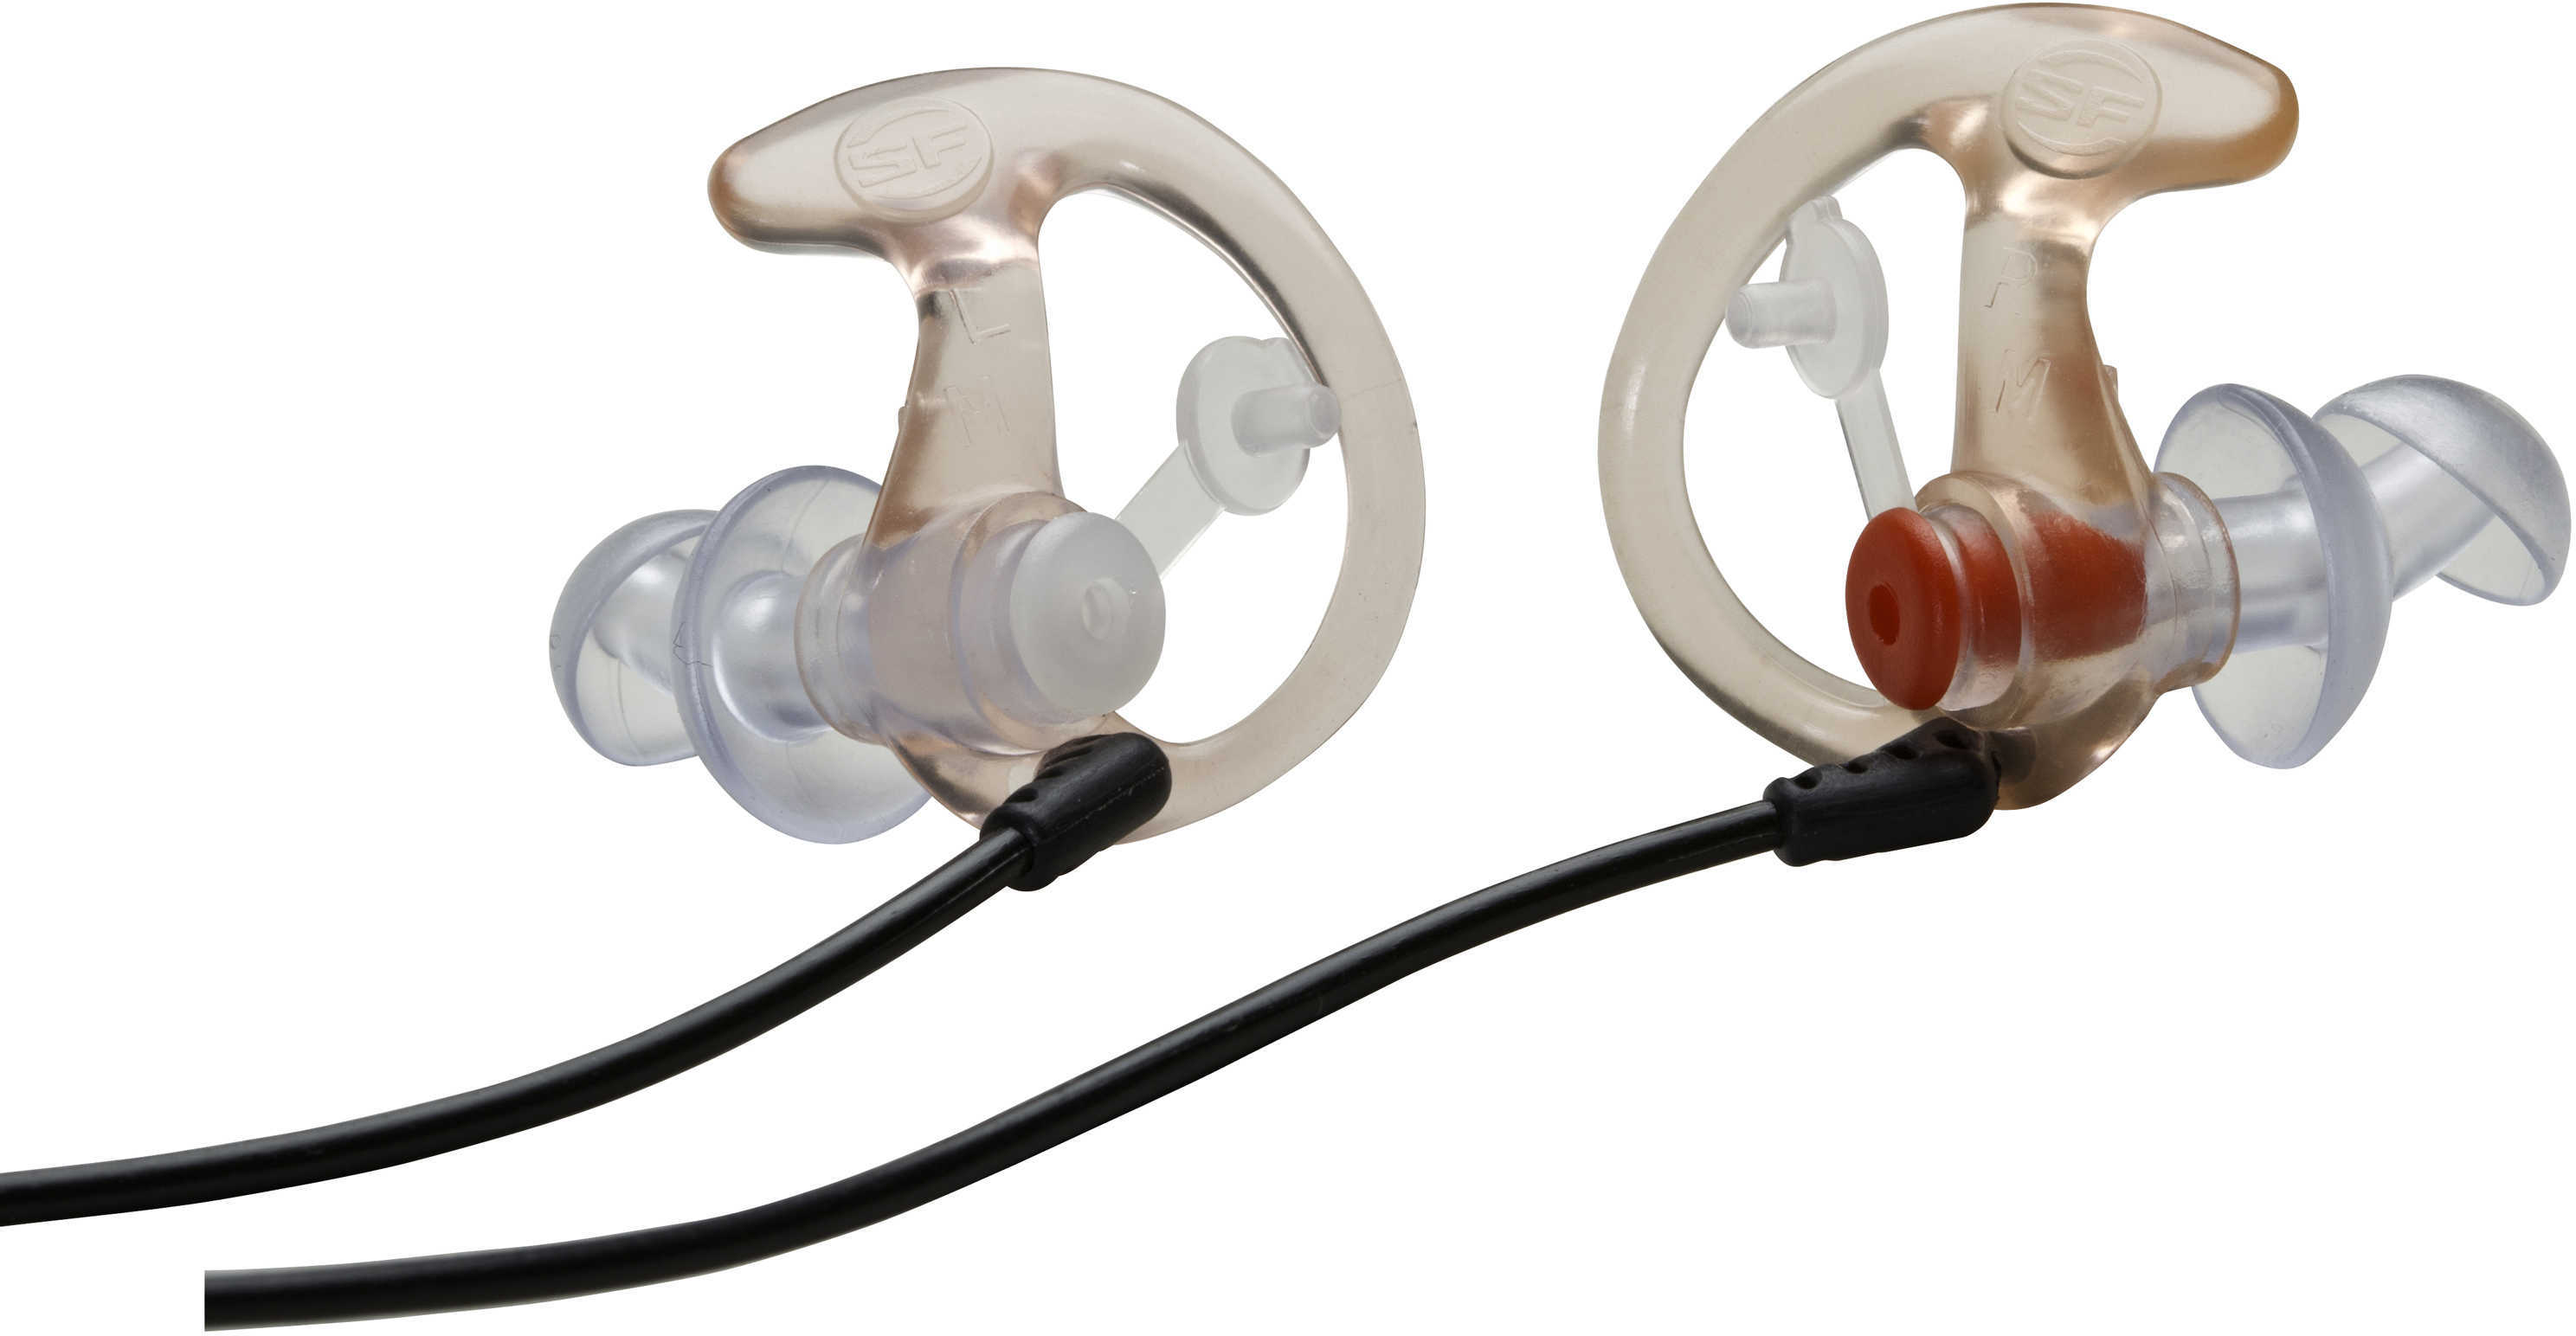 EP3 Sonic Defenders 25 Pairs - Large Clear 24Db NRR With Attached Stopper Plugs inserted 2-Flange Earplug Lowers